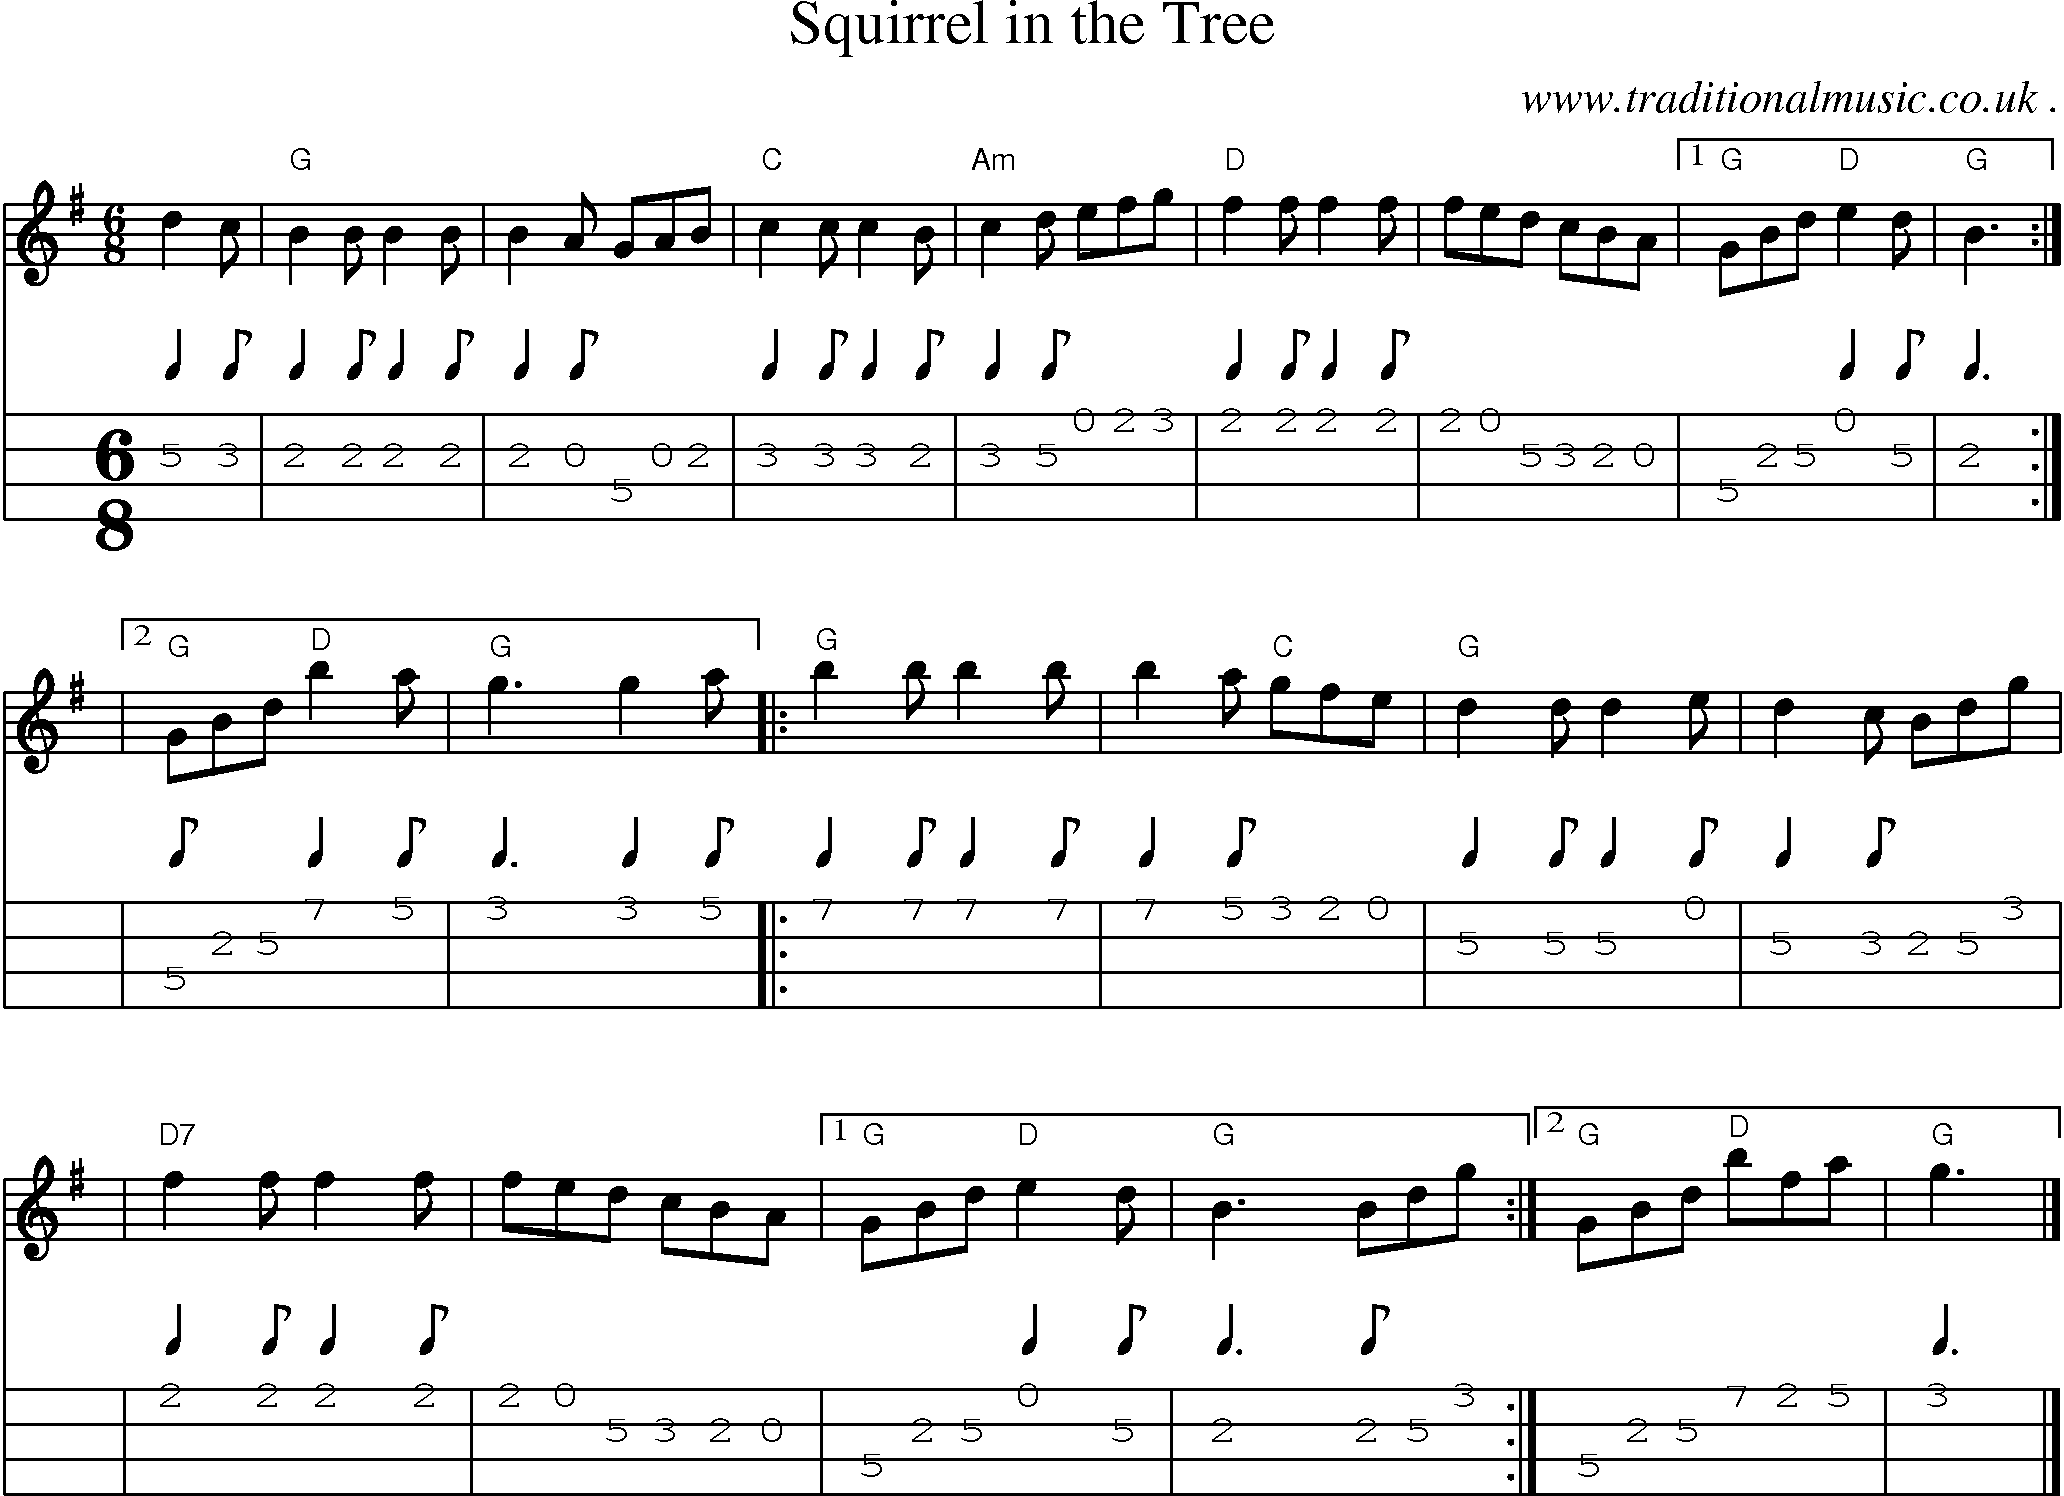 Sheet-music  score, Chords and Mandolin Tabs for Squirrel In The Tree